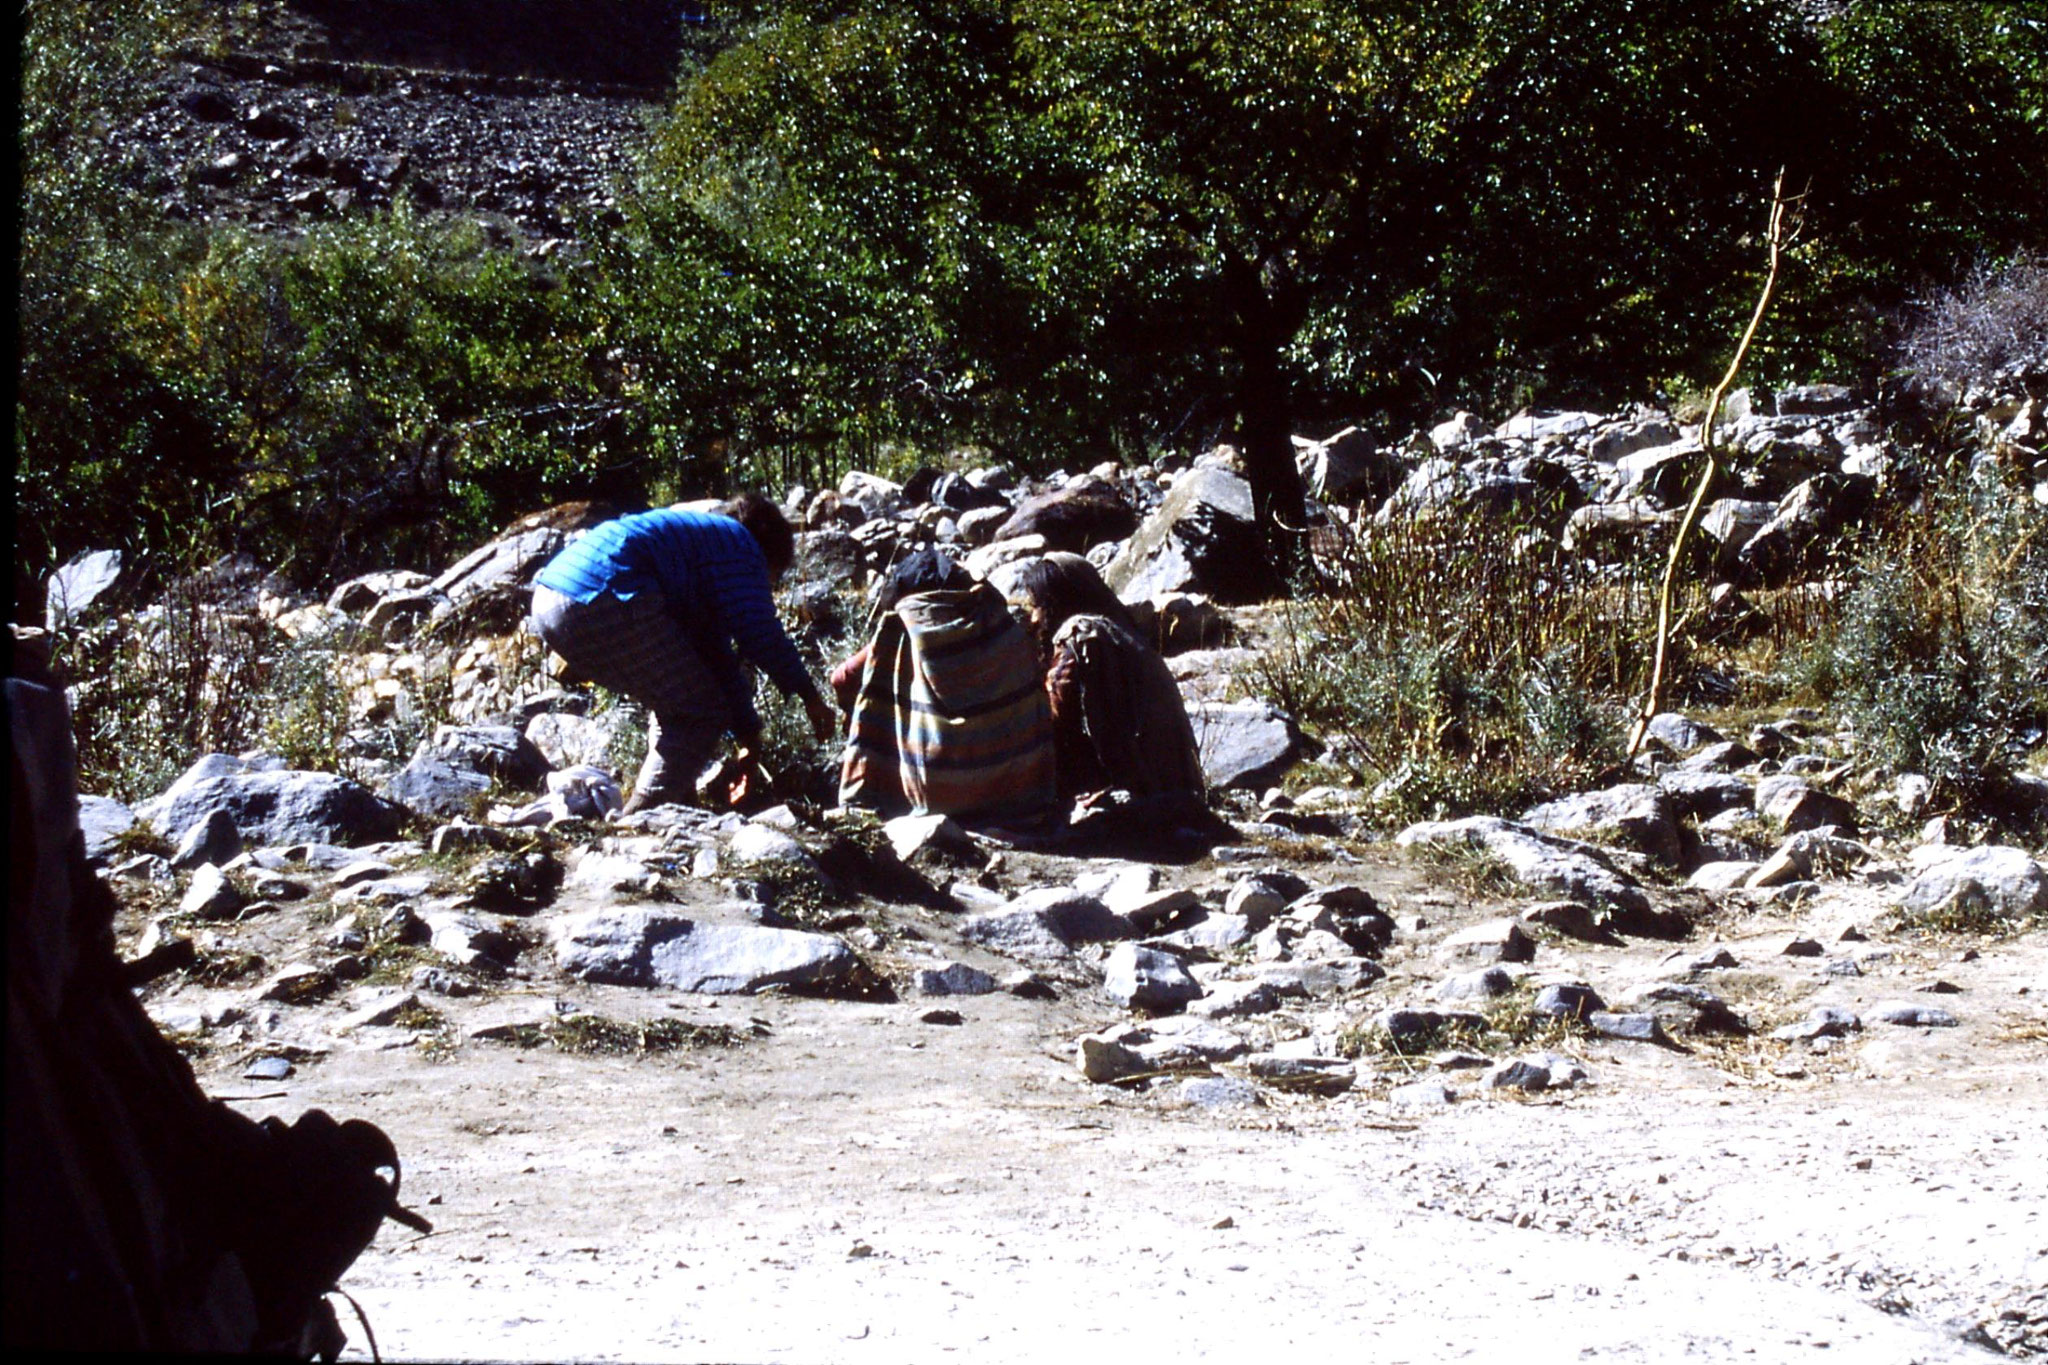 18/10/1989: 6: E and two girls washing at Khande